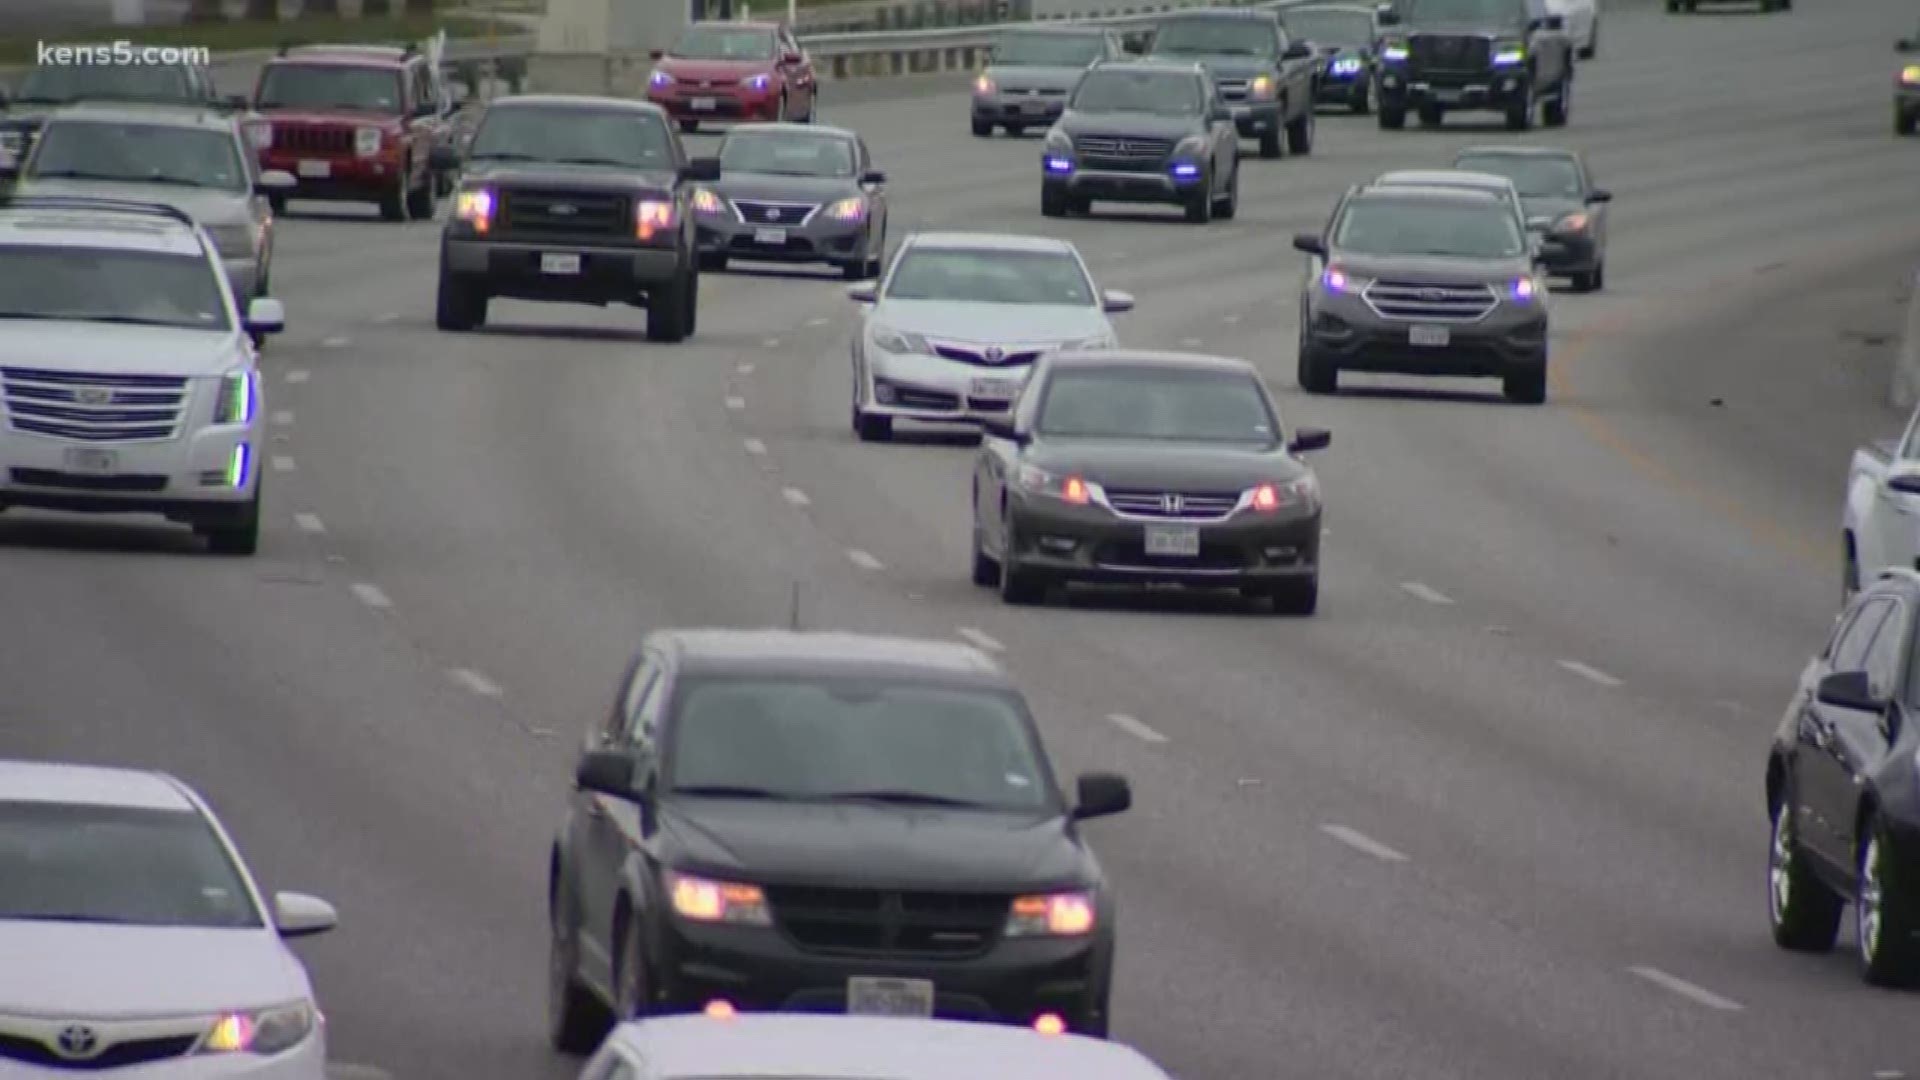 Wednesday is one of the busiest days of the year for traveling on the roads, meaning law enforcement presence will be ramped up.